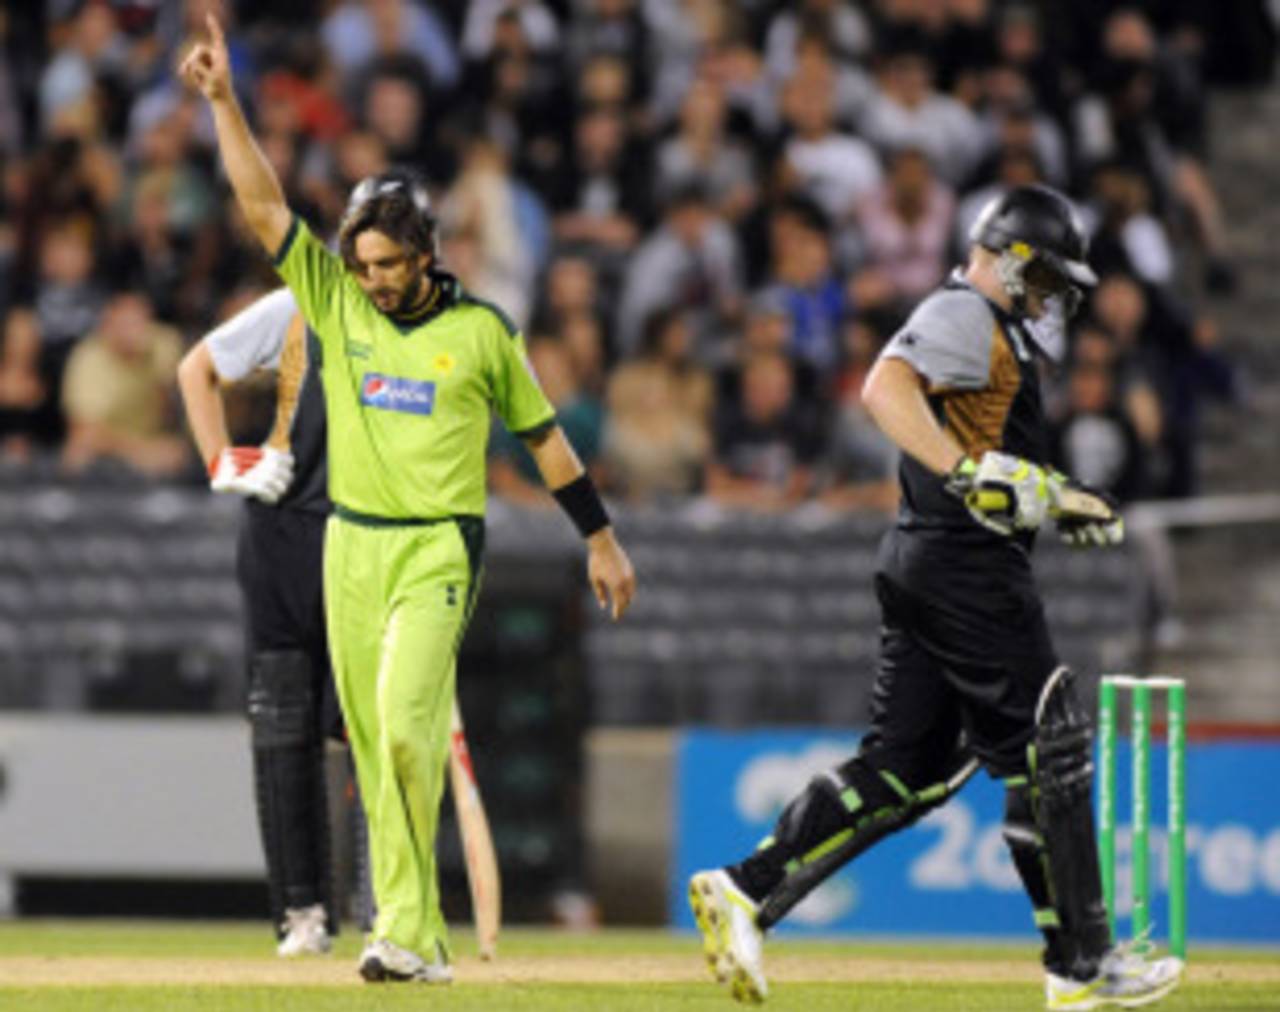 Shahid Afridi led from the front to pick up his career-best bowling figures&nbsp;&nbsp;&bull;&nbsp;&nbsp;Associated Press